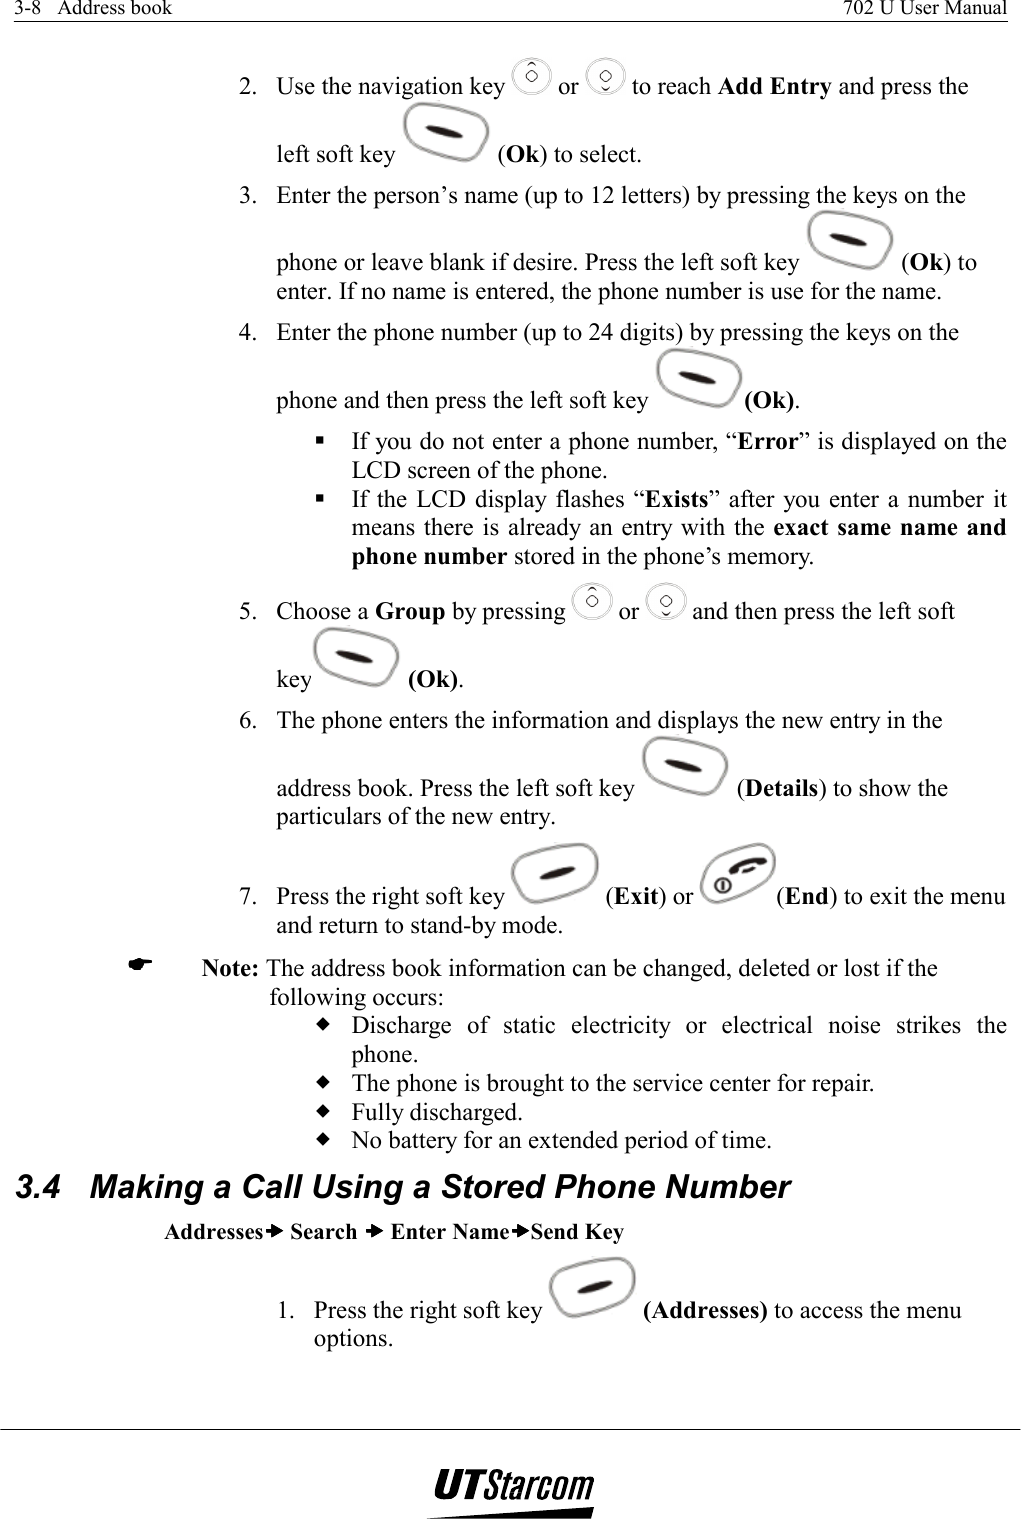 3-8   Address book    702 U User Manual   2.  Use the navigation key   or   to reach Add Entry and press the left soft key   (Ok) to select. 3.  Enter the person’s name (up to 12 letters) by pressing the keys on the phone or leave blank if desire. Press the left soft key   (Ok) to enter. If no name is entered, the phone number is use for the name. 4.  Enter the phone number (up to 24 digits) by pressing the keys on the phone and then press the left soft key  (Ok).  If you do not enter a phone number, “Error” is displayed on the LCD screen of the phone.  If the LCD display flashes “Exists” after you enter a number it means there is already an entry with the exact same name and phone number stored in the phone’s memory. 5. Choose a Group by pressing   or   and then press the left soft key  (Ok). 6.  The phone enters the information and displays the new entry in the address book. Press the left soft key   (Details) to show the particulars of the new entry. 7.  Press the right soft key   (Exit) or  (End) to exit the menu and return to stand-by mode.  Note: The address book information can be changed, deleted or lost if the following occurs:  Discharge of static electricity or electrical noise strikes the phone.  The phone is brought to the service center for repair.  Fully discharged.  No battery for an extended period of time. 3.4  Making a Call Using a Stored Phone Number Addressesxxxx Search xxxx Enter NamexxxxSend Key 1.  Press the right soft key   (Addresses) to access the menu options. 